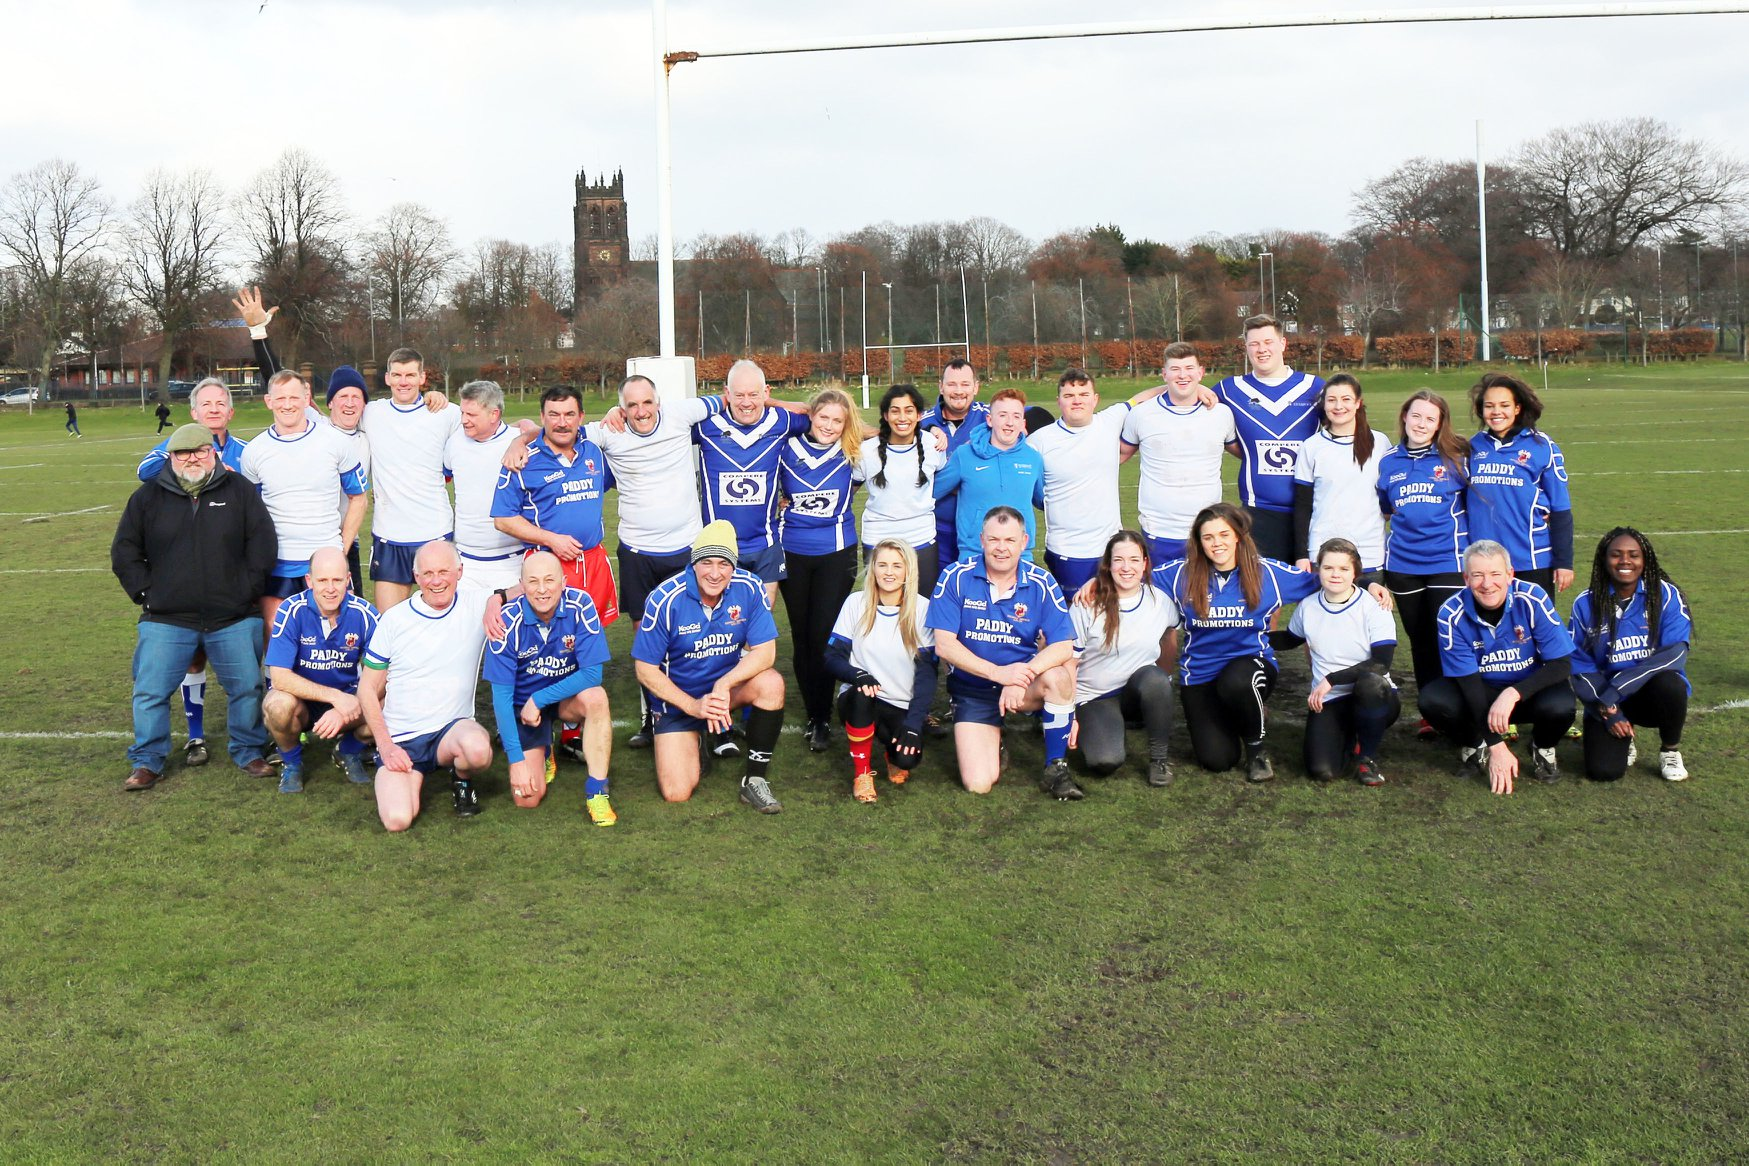 Inaugural rugby league match between British universities celebrated 50 years on